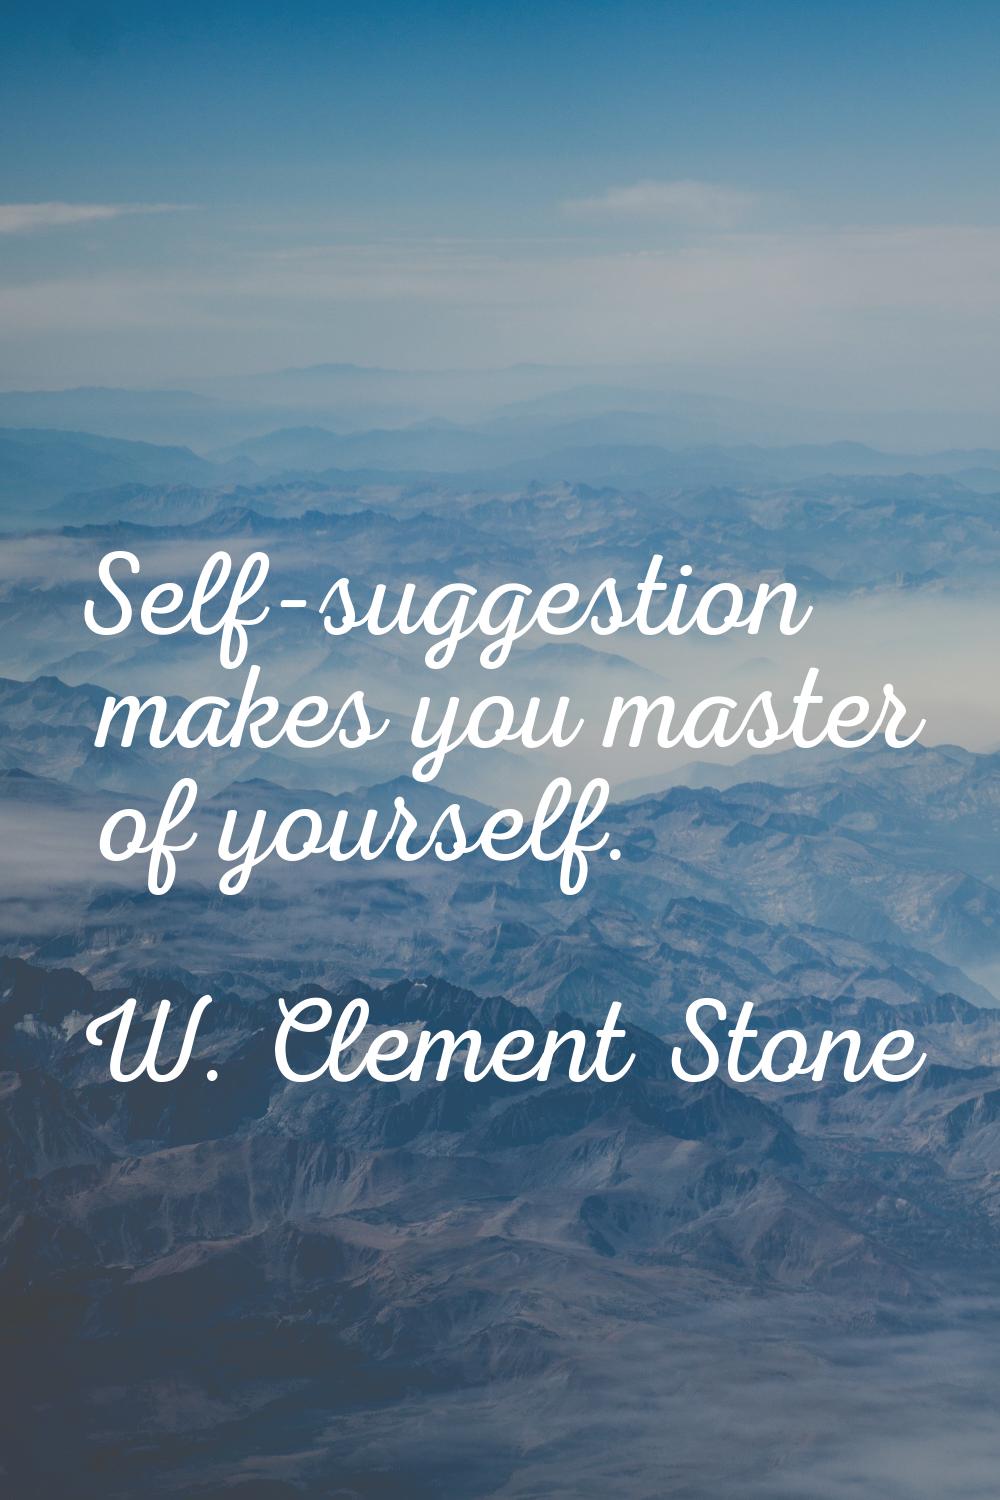 Self-suggestion makes you master of yourself.